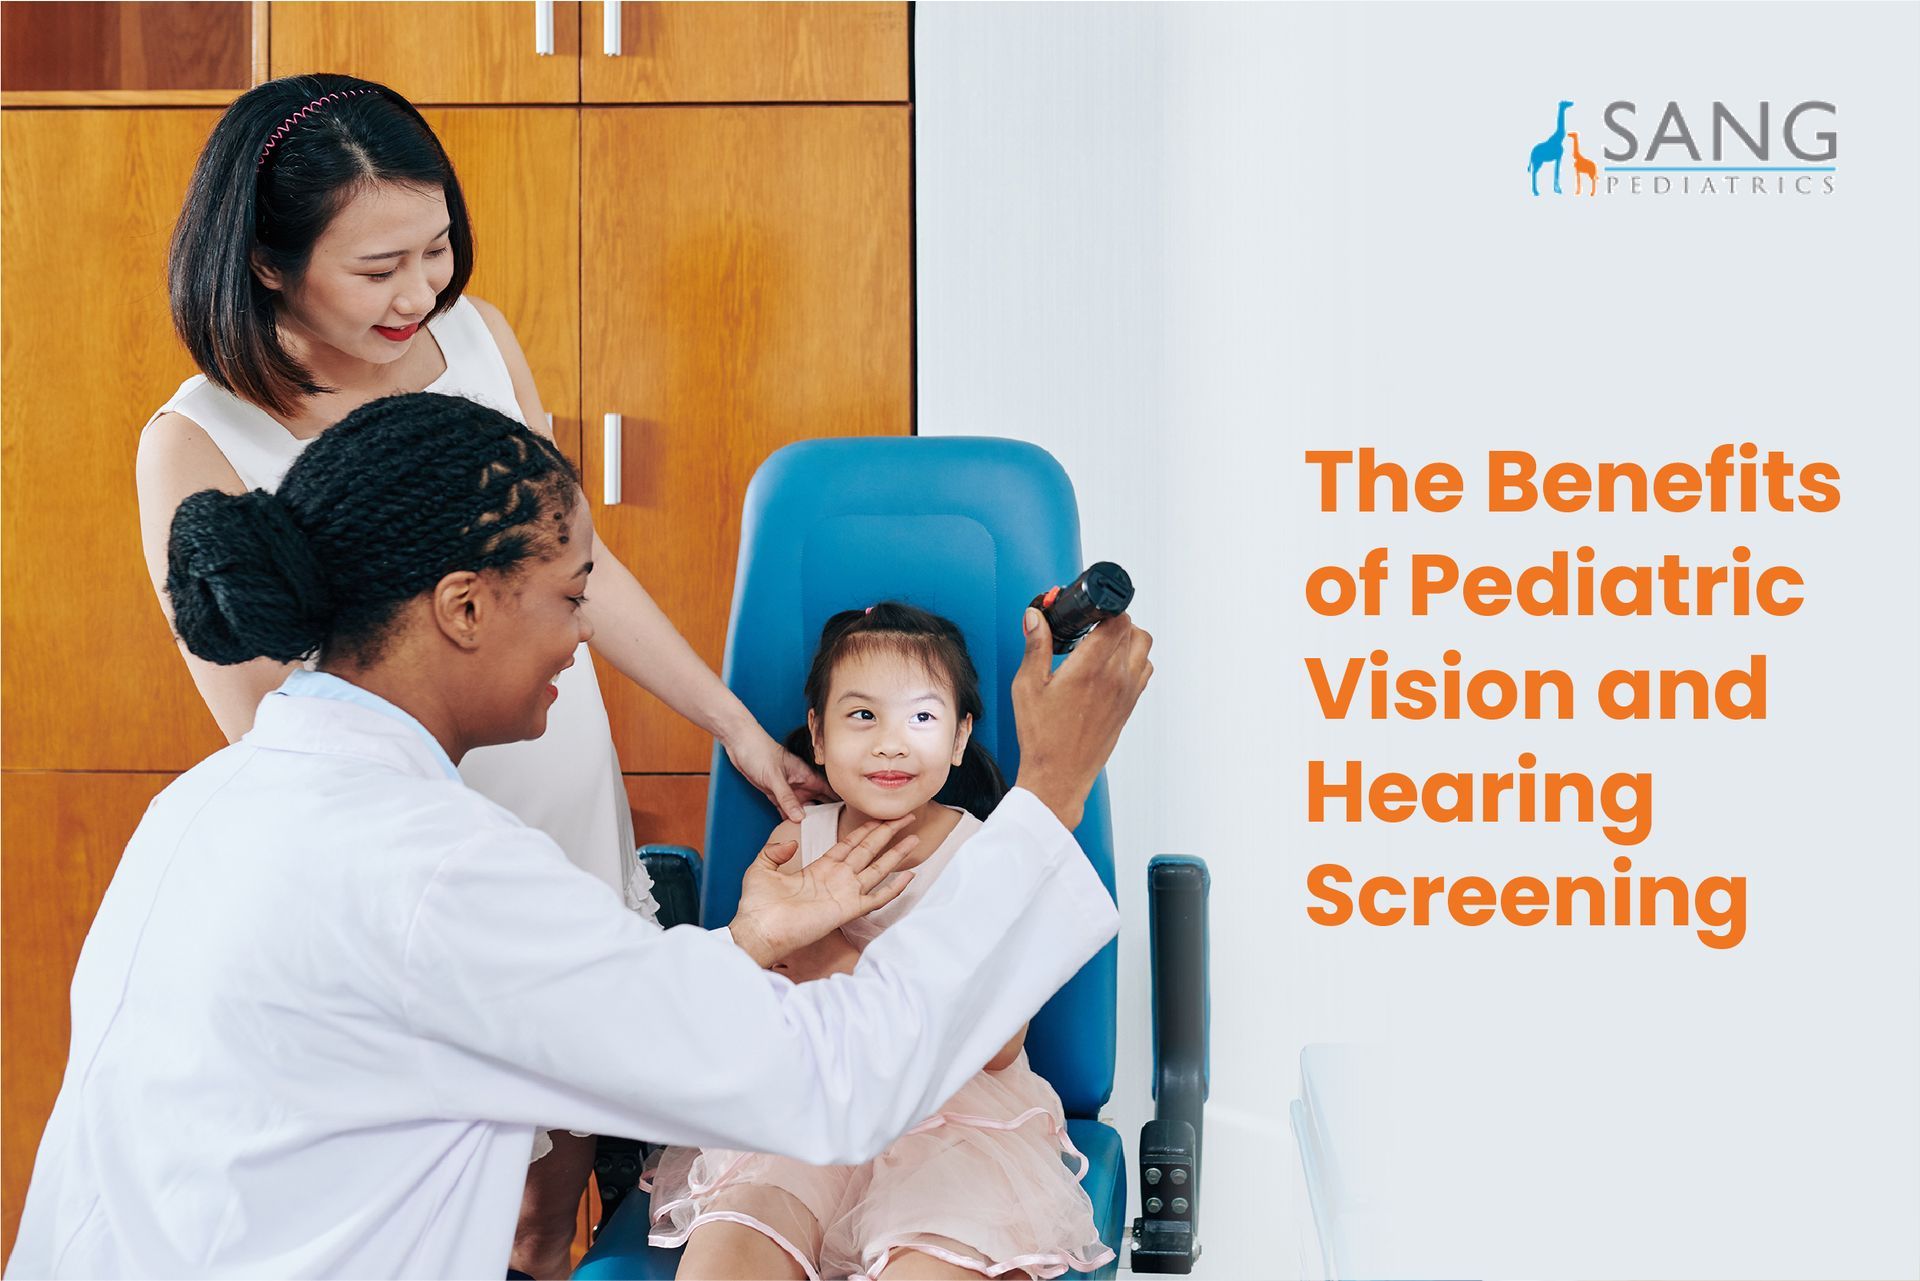 The Benefits of Pediatric Vision and Hearing Screening